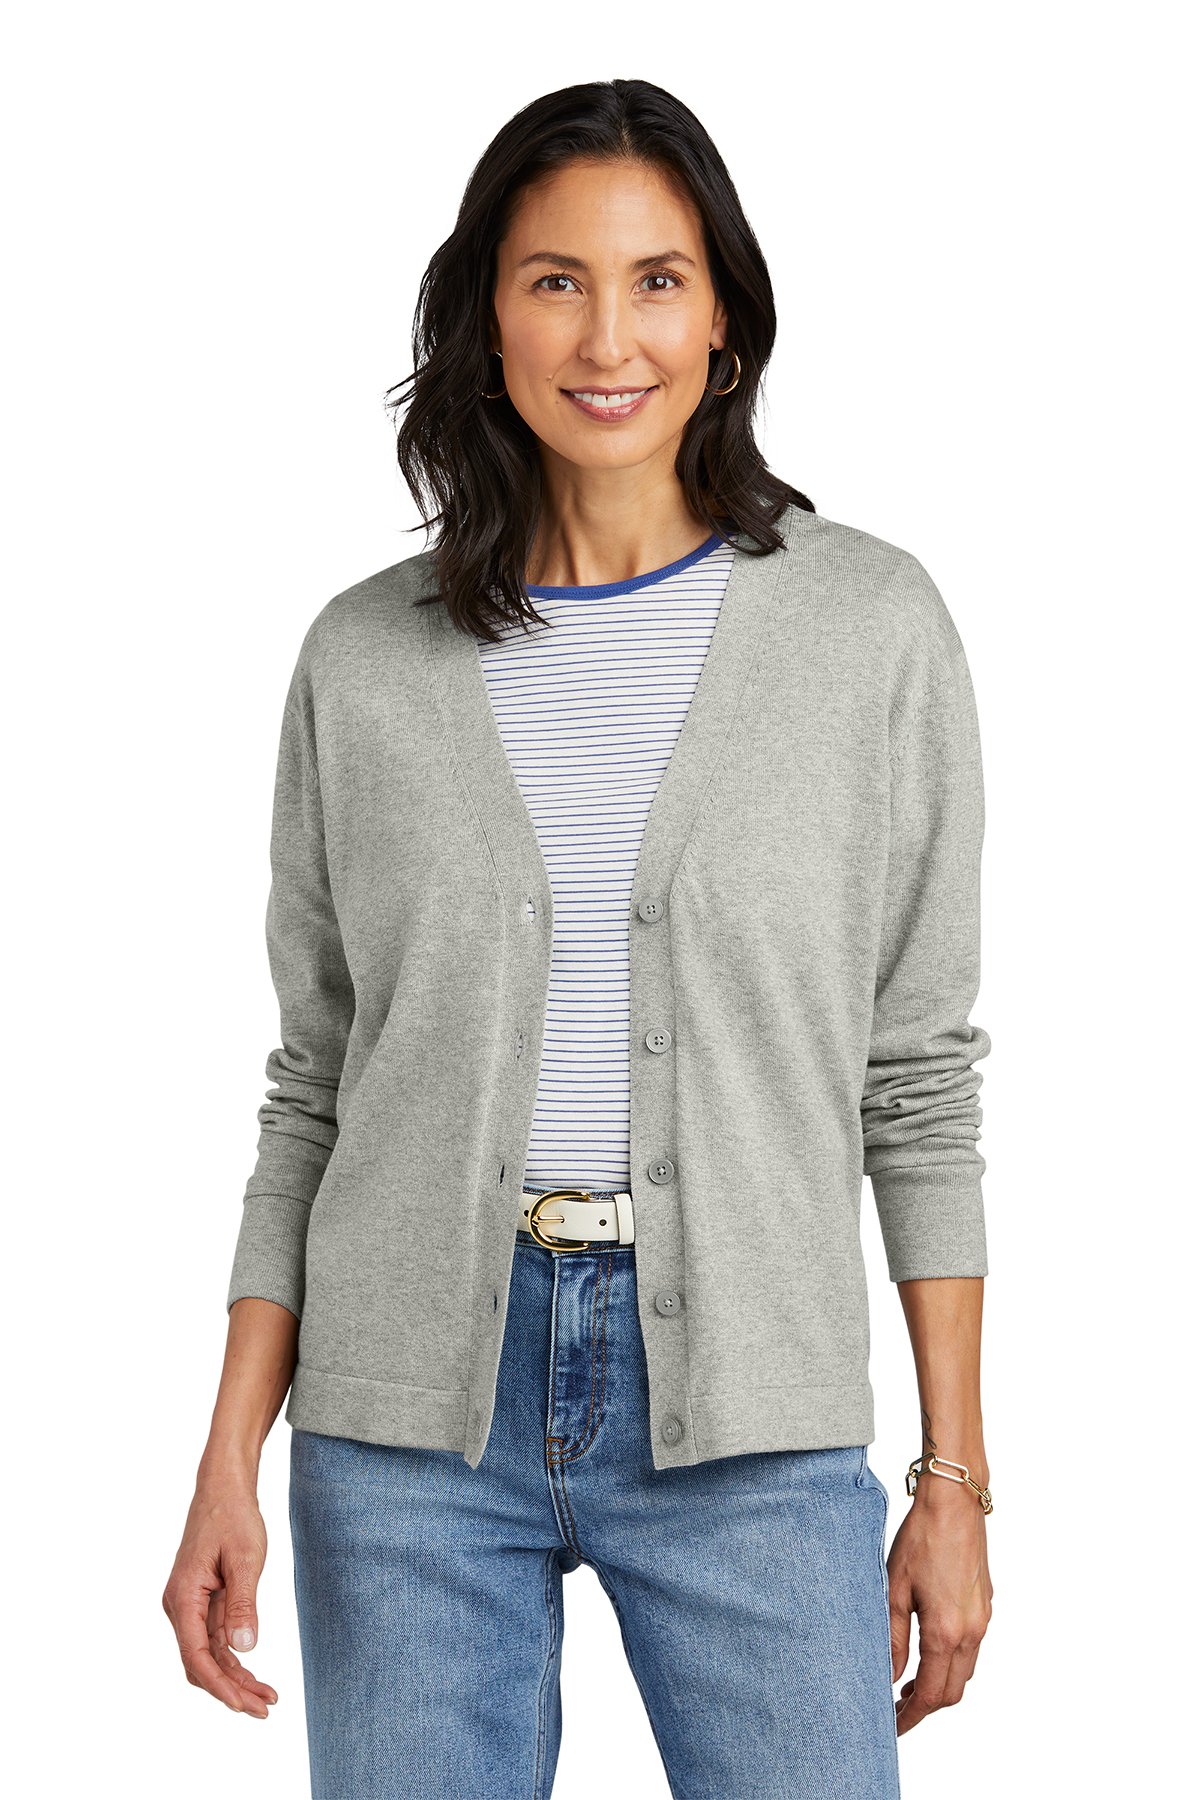 Brooks Brothers Women’s Cotton Stretch Cardigan Sweater | Product | SanMar